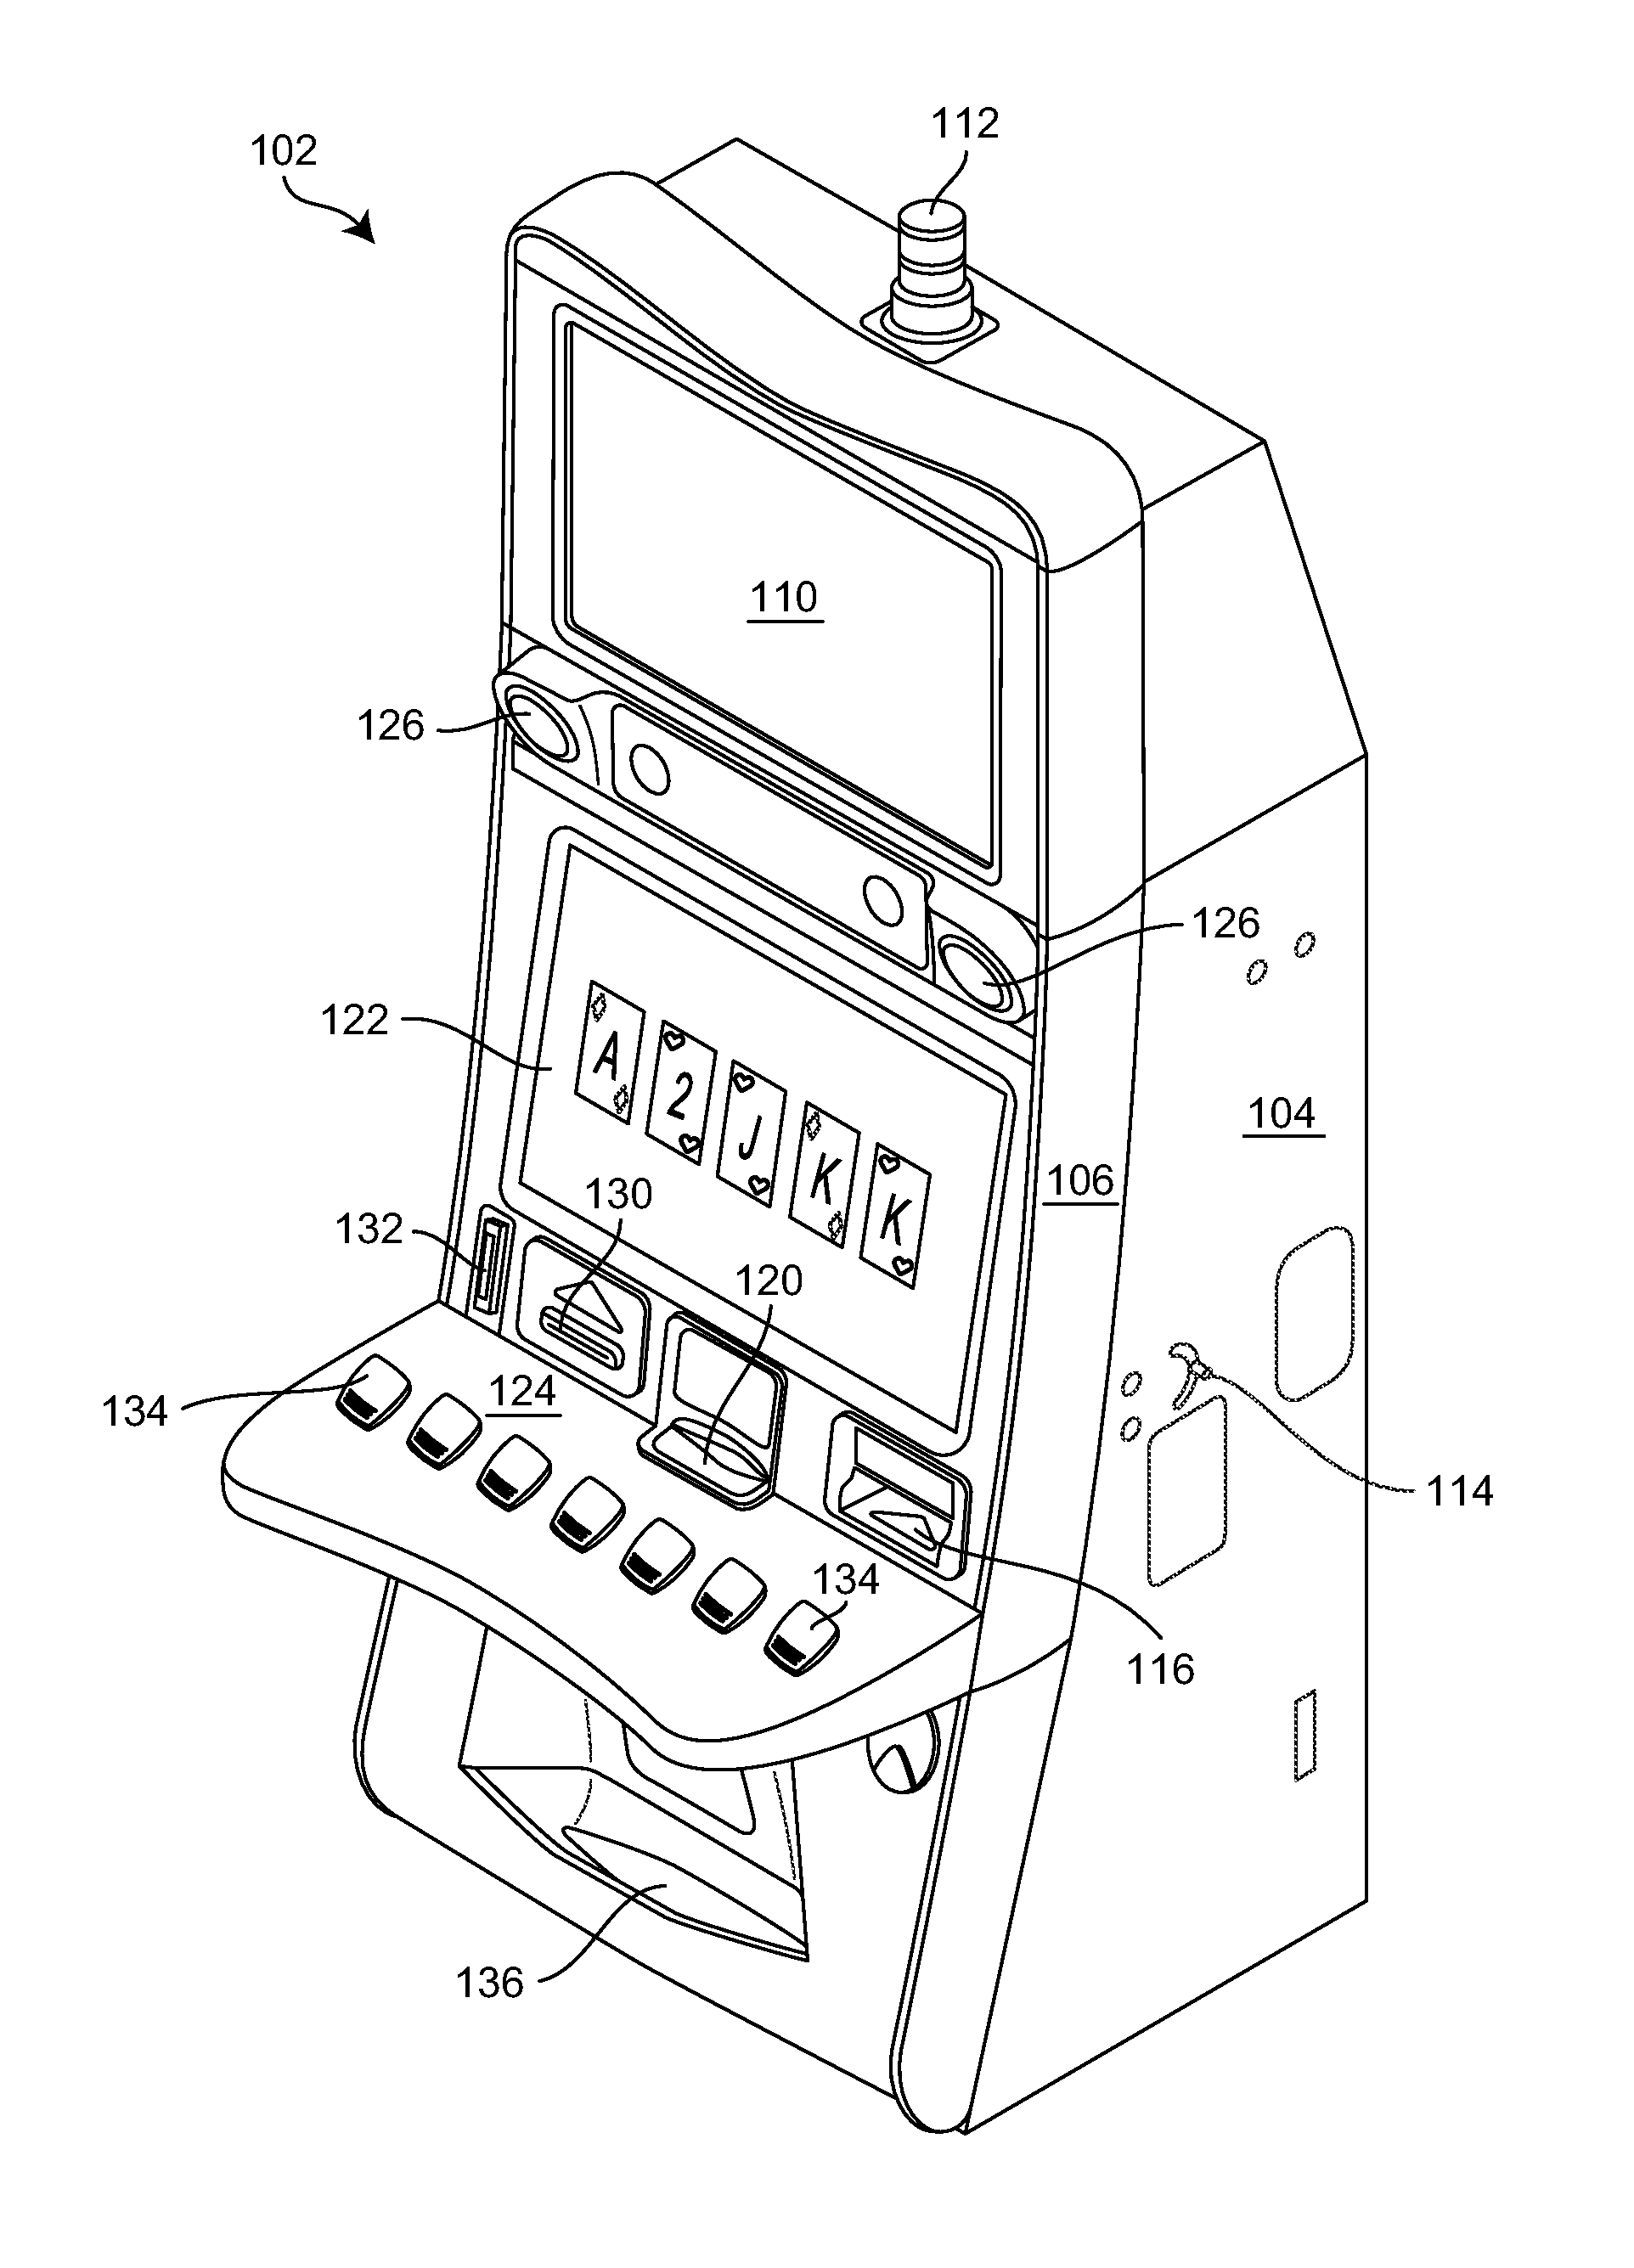 Touch button with tactile elements